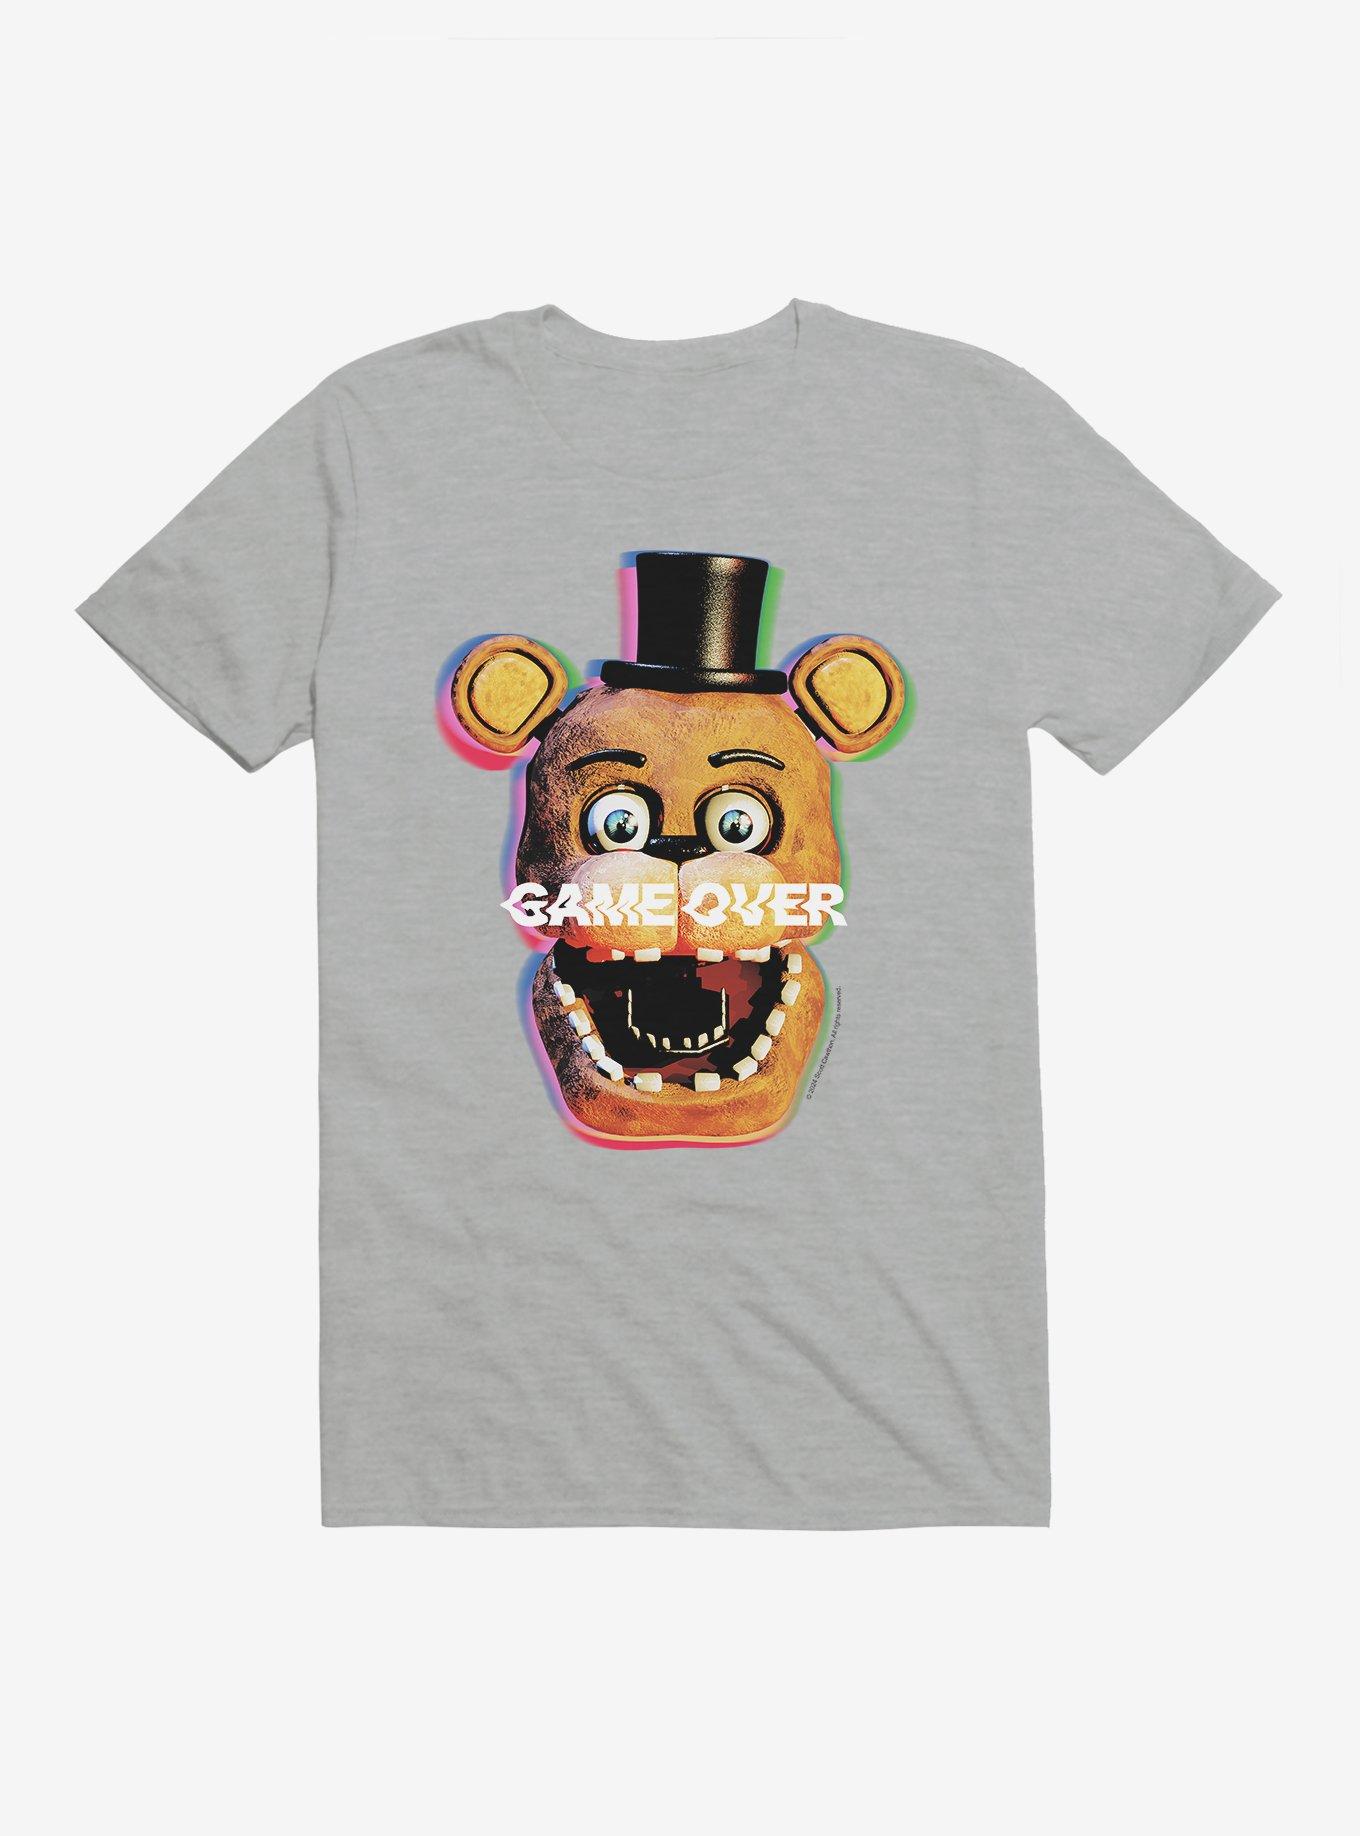 Five Nights At Freddy's Game Over Glitch T-Shirt, SPORT GRAY, hi-res